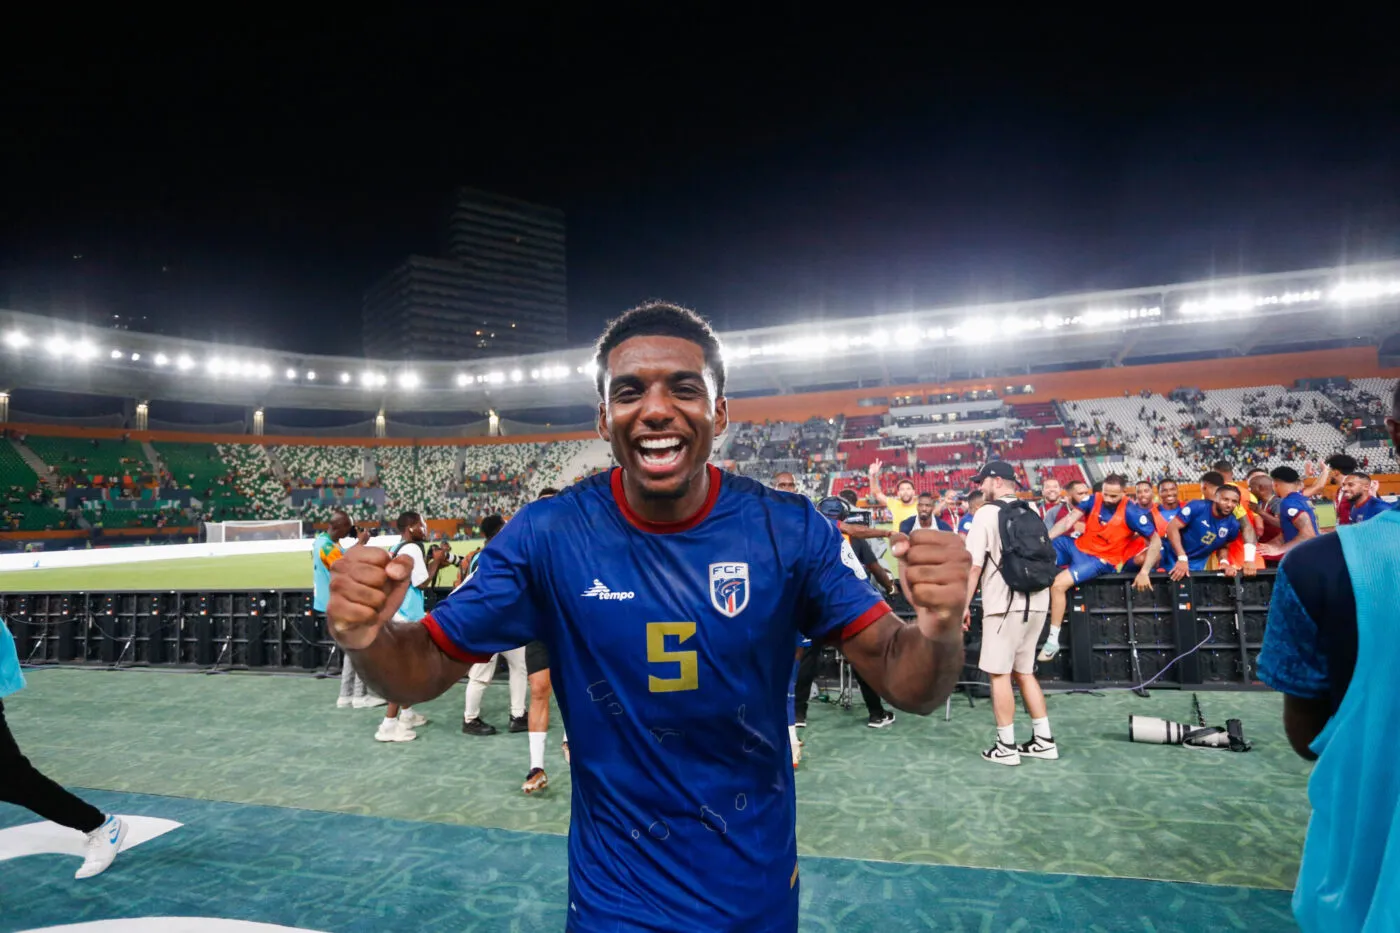 Logan Costa of Cape Verde during the Africa Nations Cup 2024 match between Ghana and Cape Verde on January 14, 2023 at Le Felicia stadium in Abidjan, Ivory Coast.